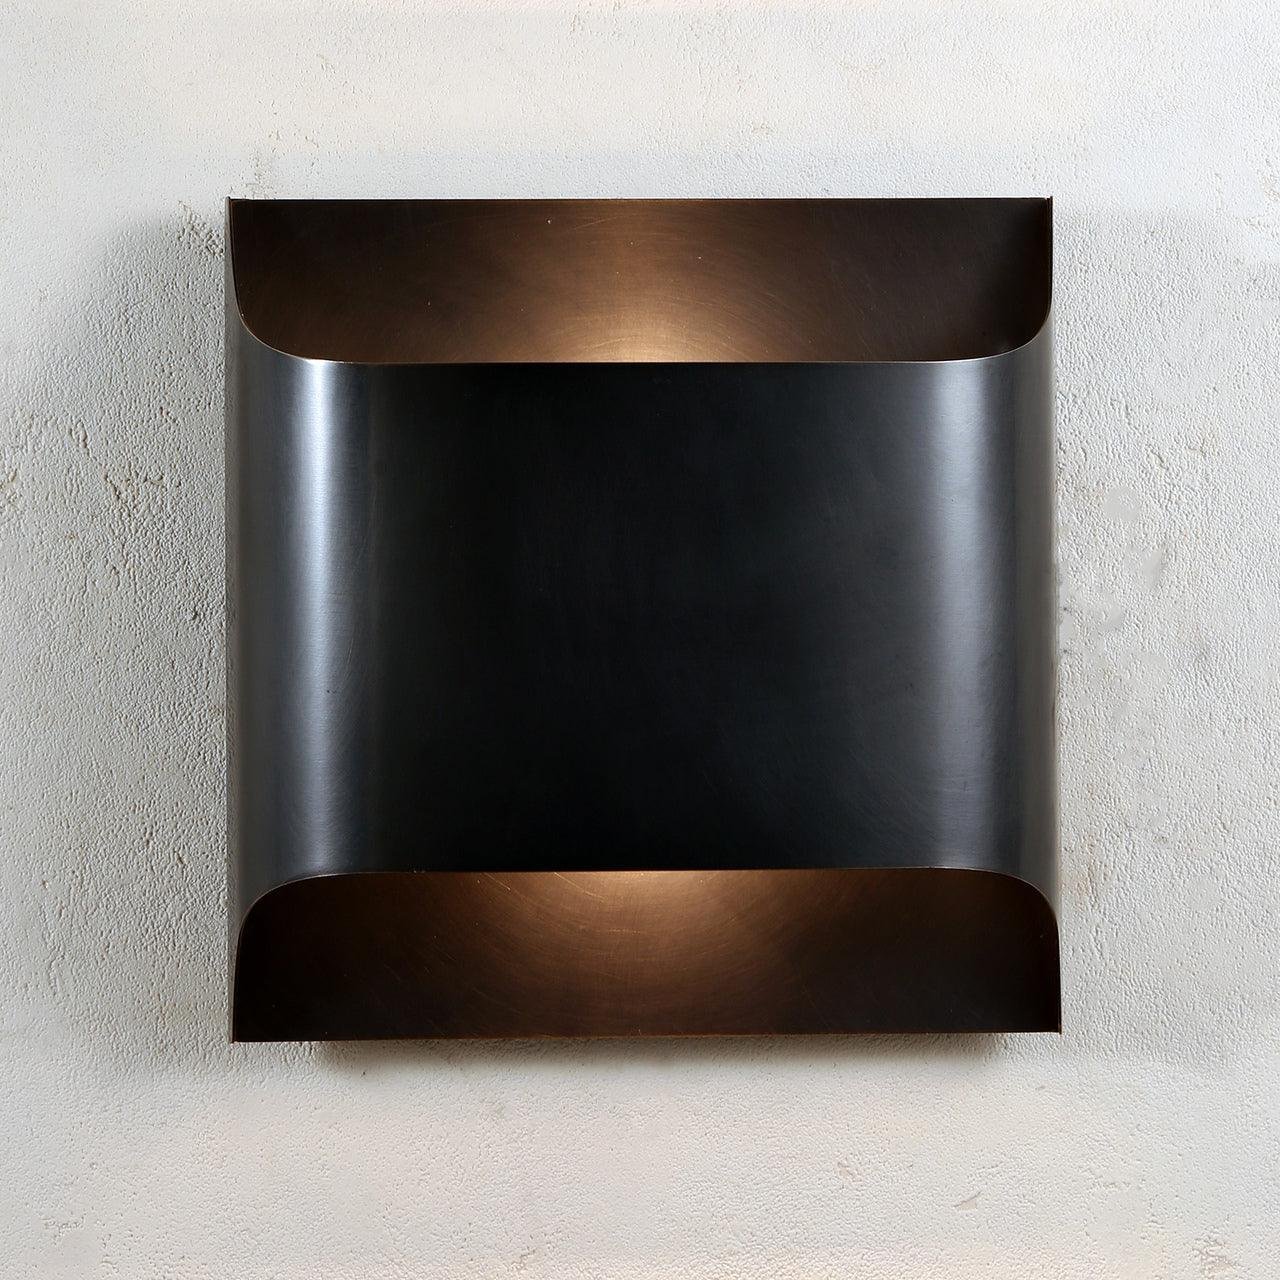 Blacked Leclerc Sconce measuring Ø 9.8 inches x H 9.8 inches (Dia 25cm x H 25cm)